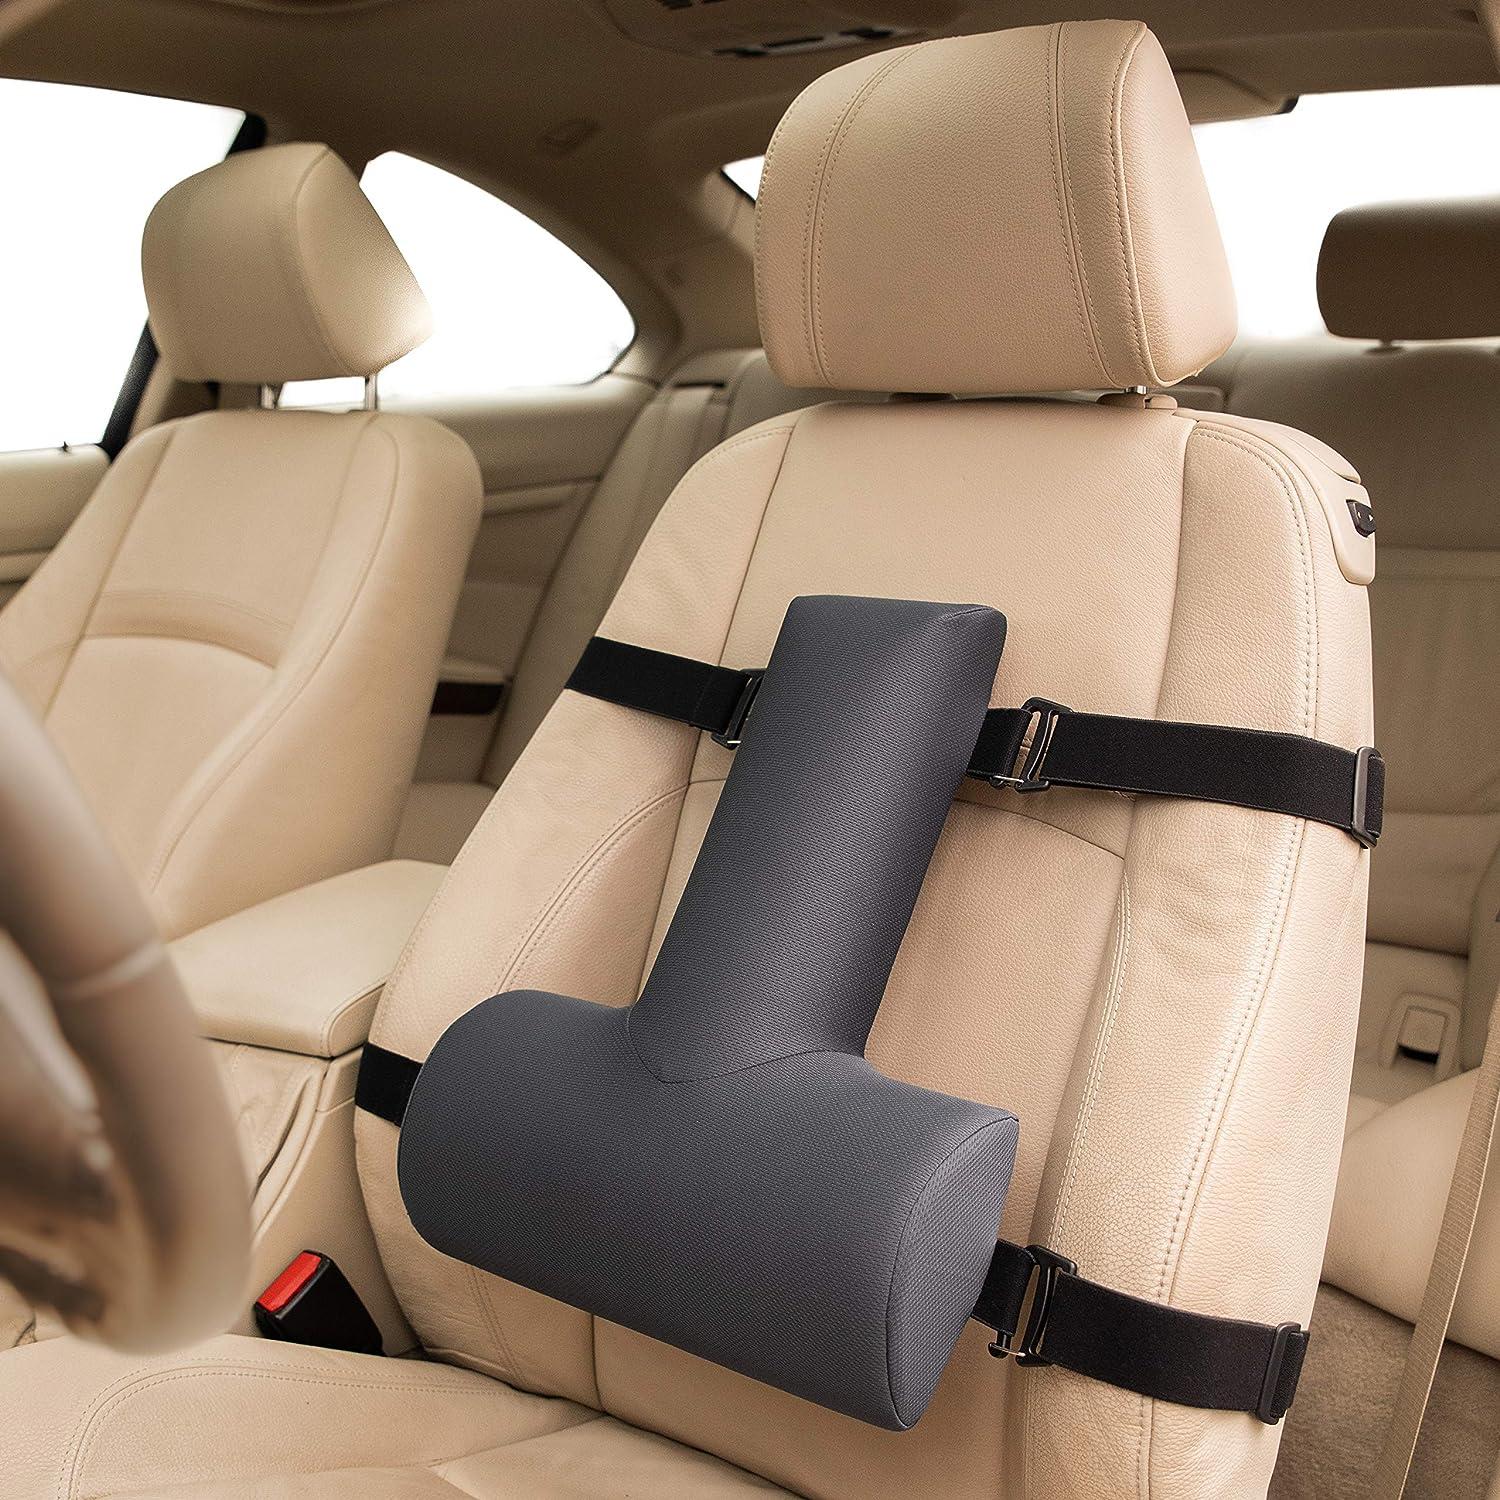 The Original McKenzie Lumbar Roll by OPTP - Low Back Support for Office  Chairs and Car Seats 